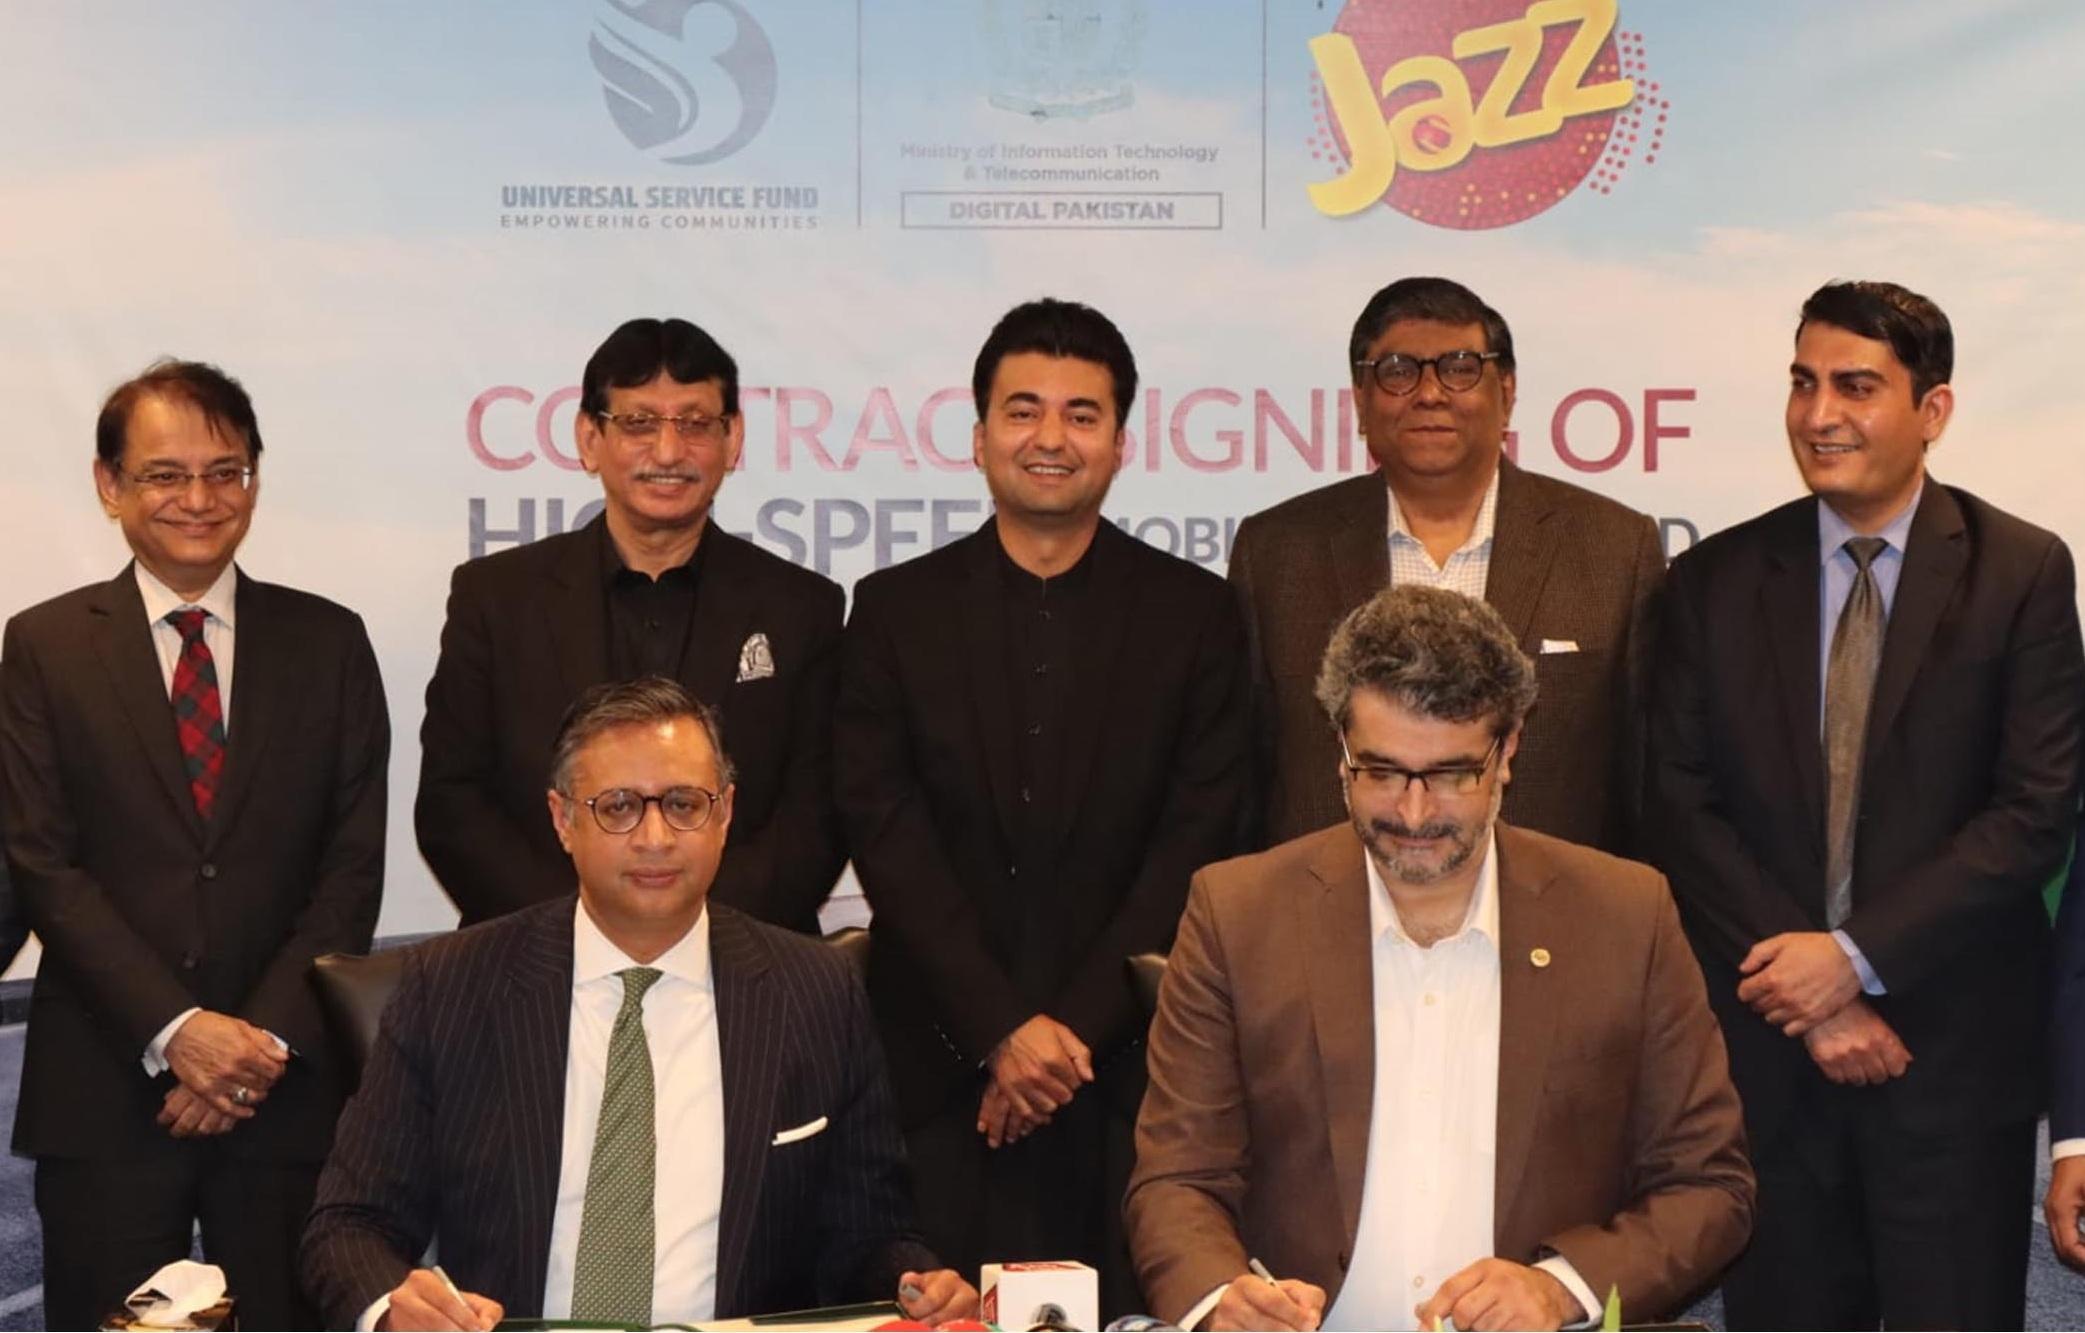 Jazz collaborates with USF to provide 4G connectivity to unserved patches of M-3 and M-5 motorways